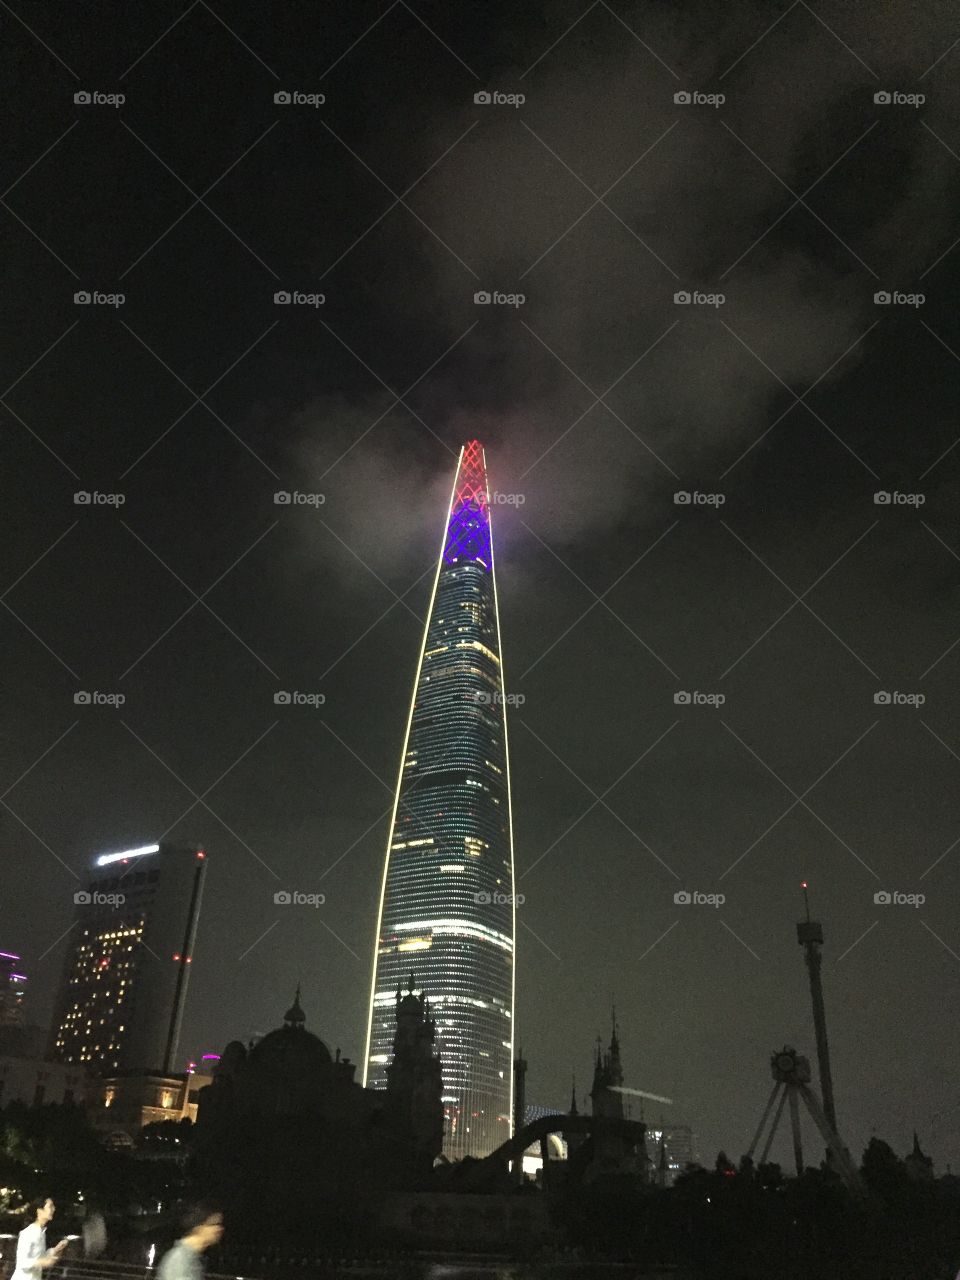 Lotte World Tower on cloudy eve